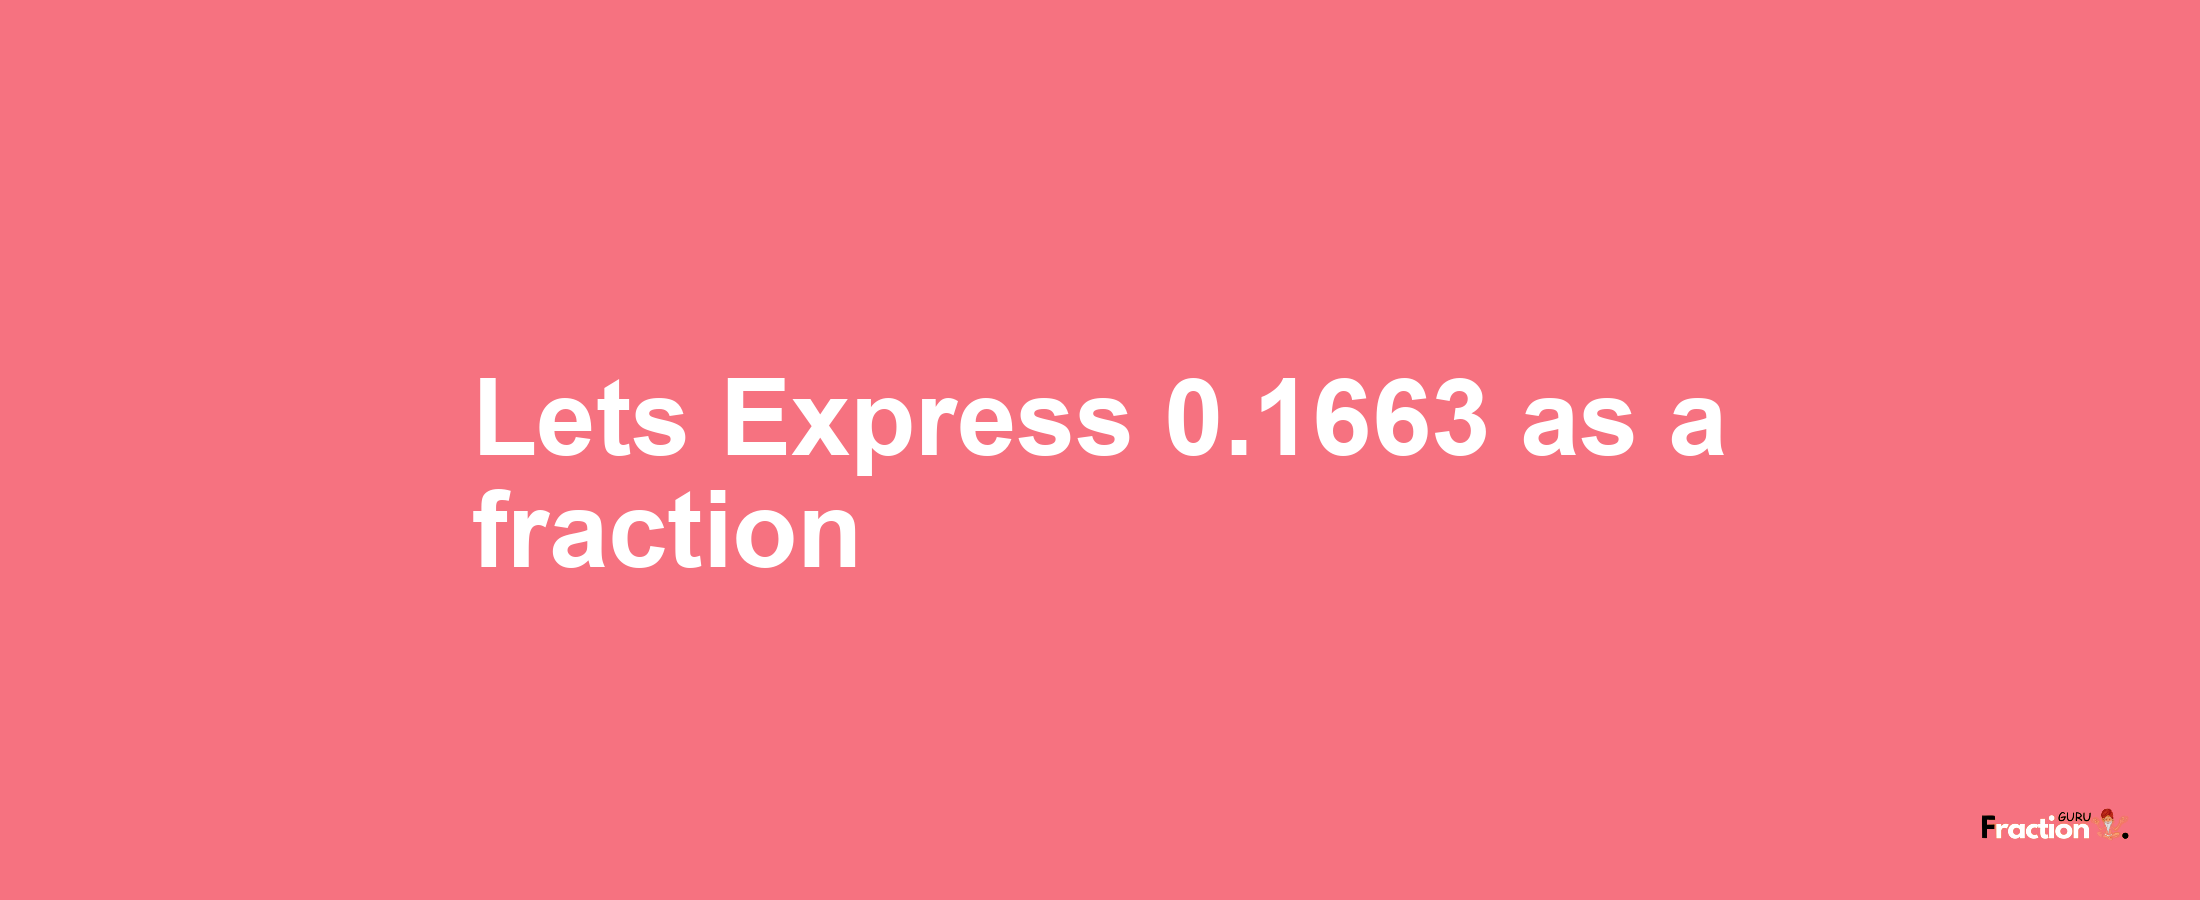 Lets Express 0.1663 as afraction